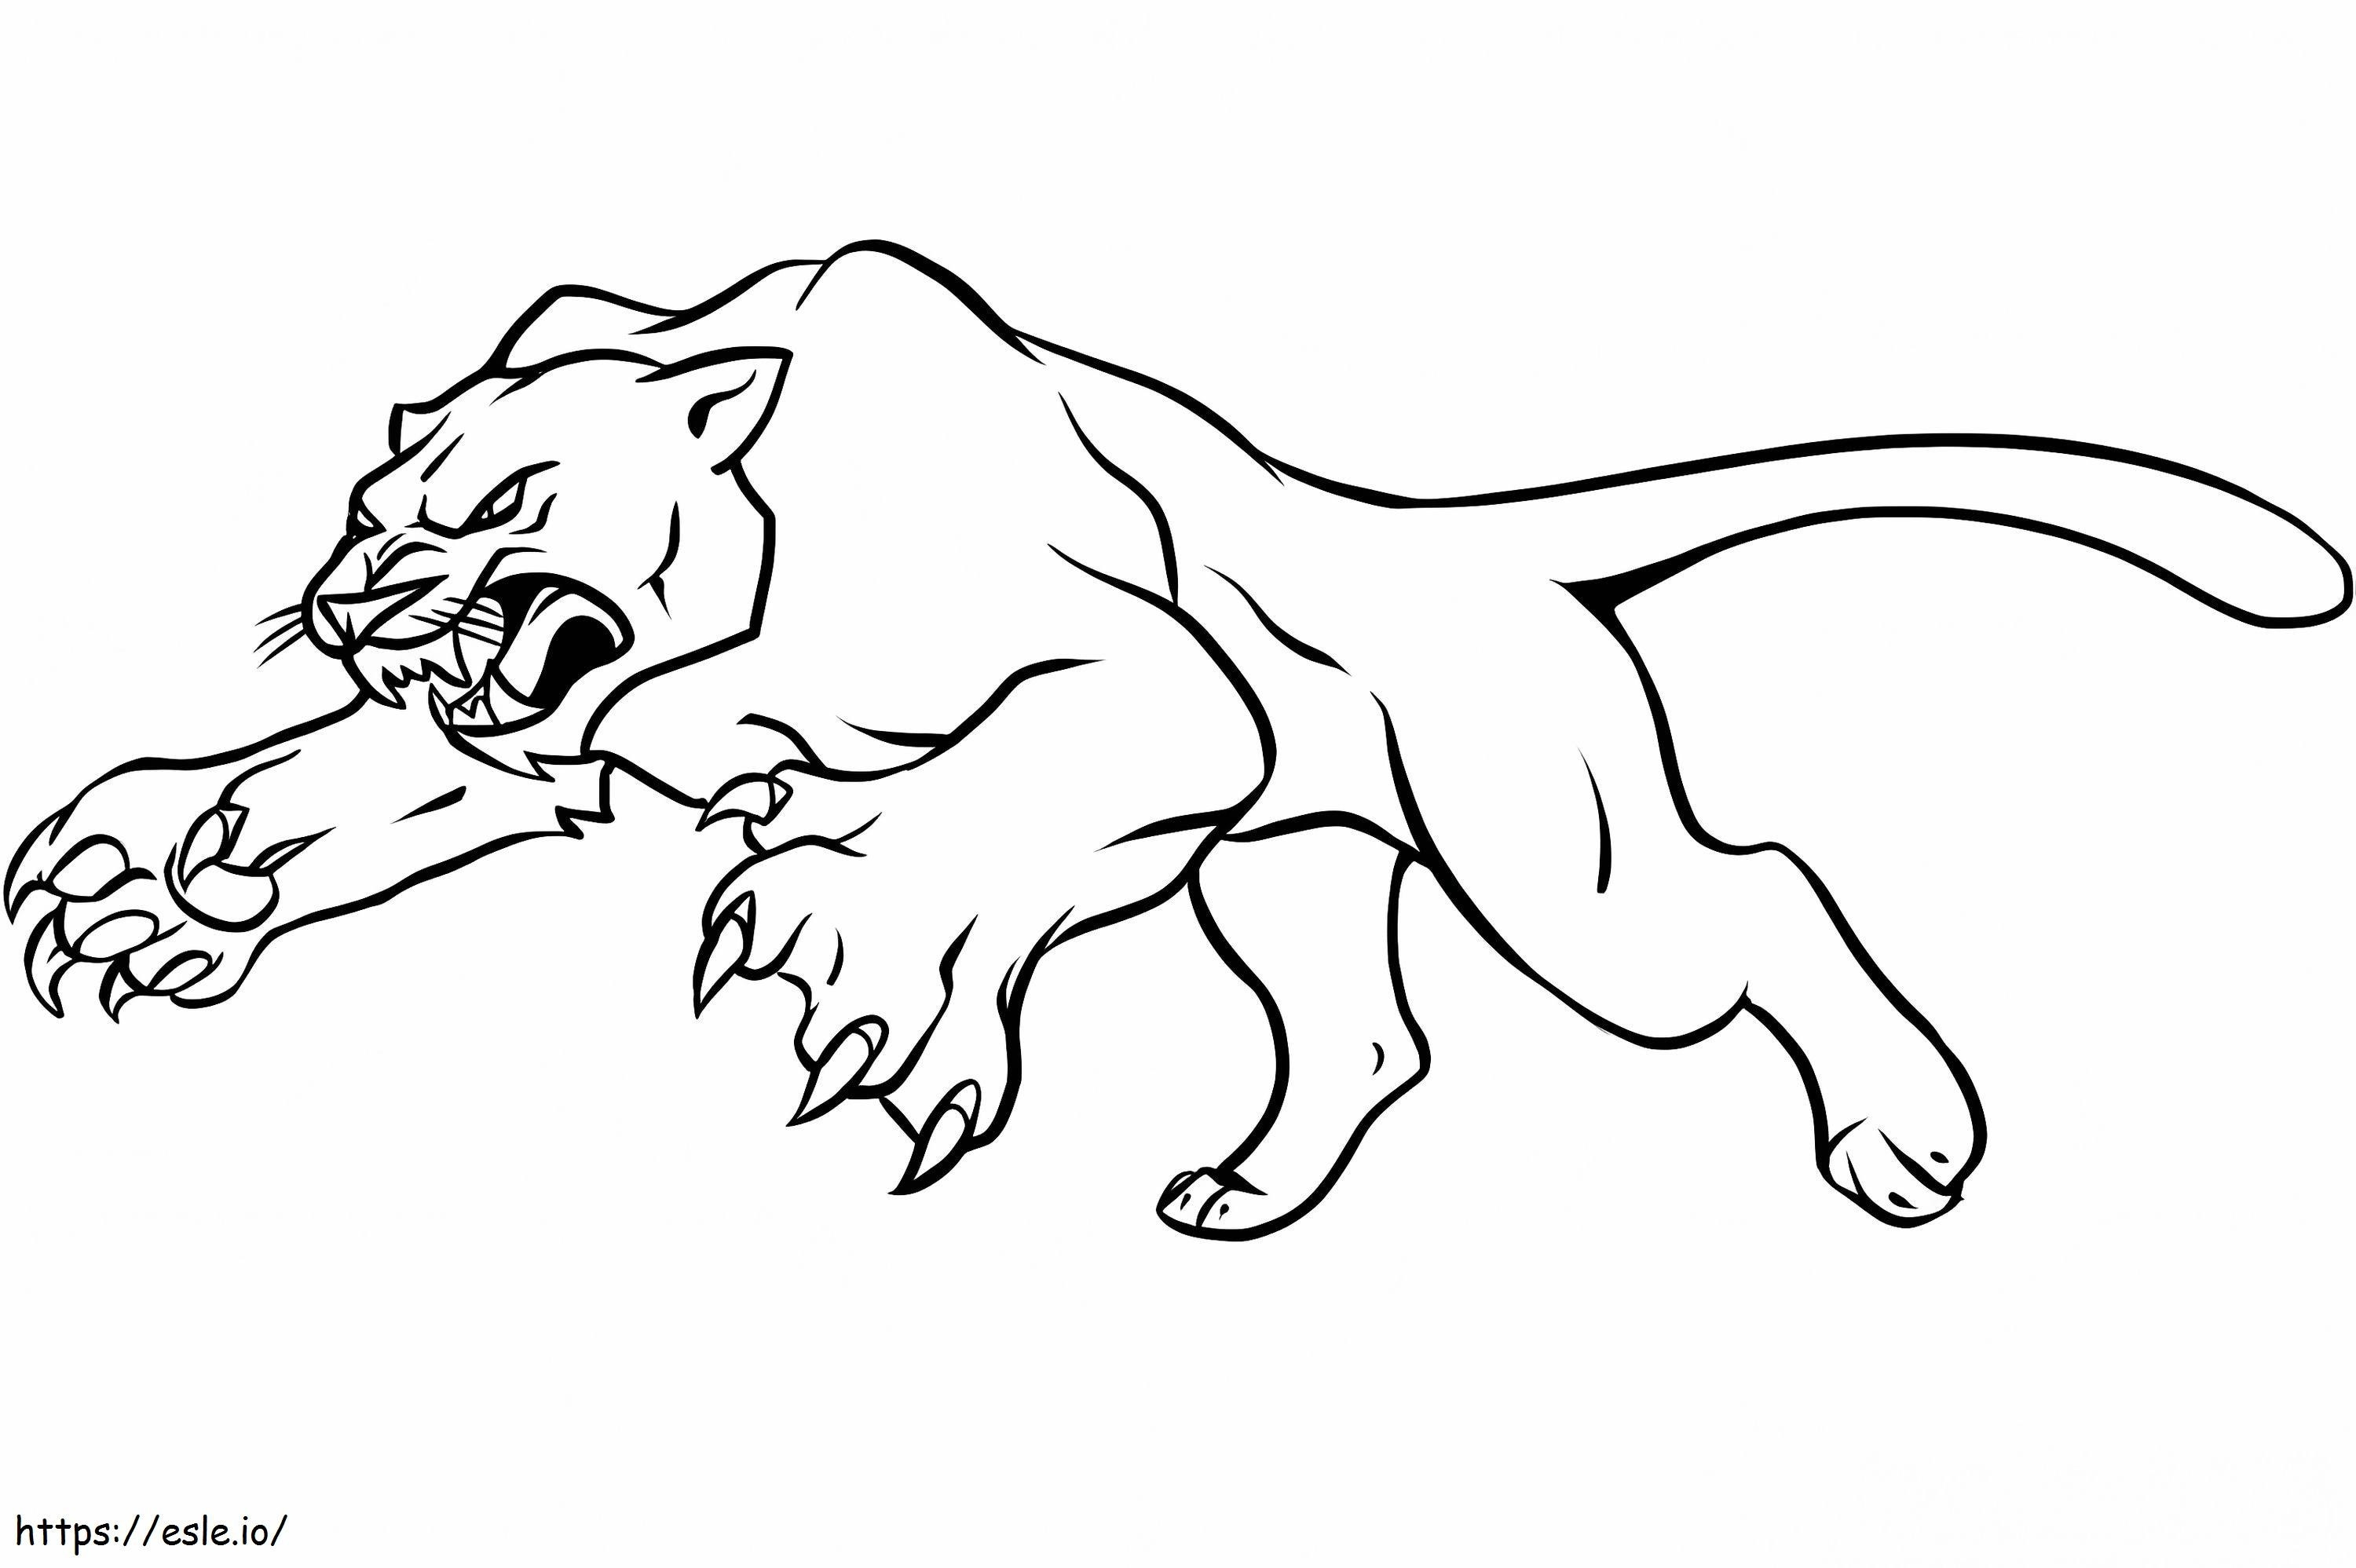 Panther Attack coloring page